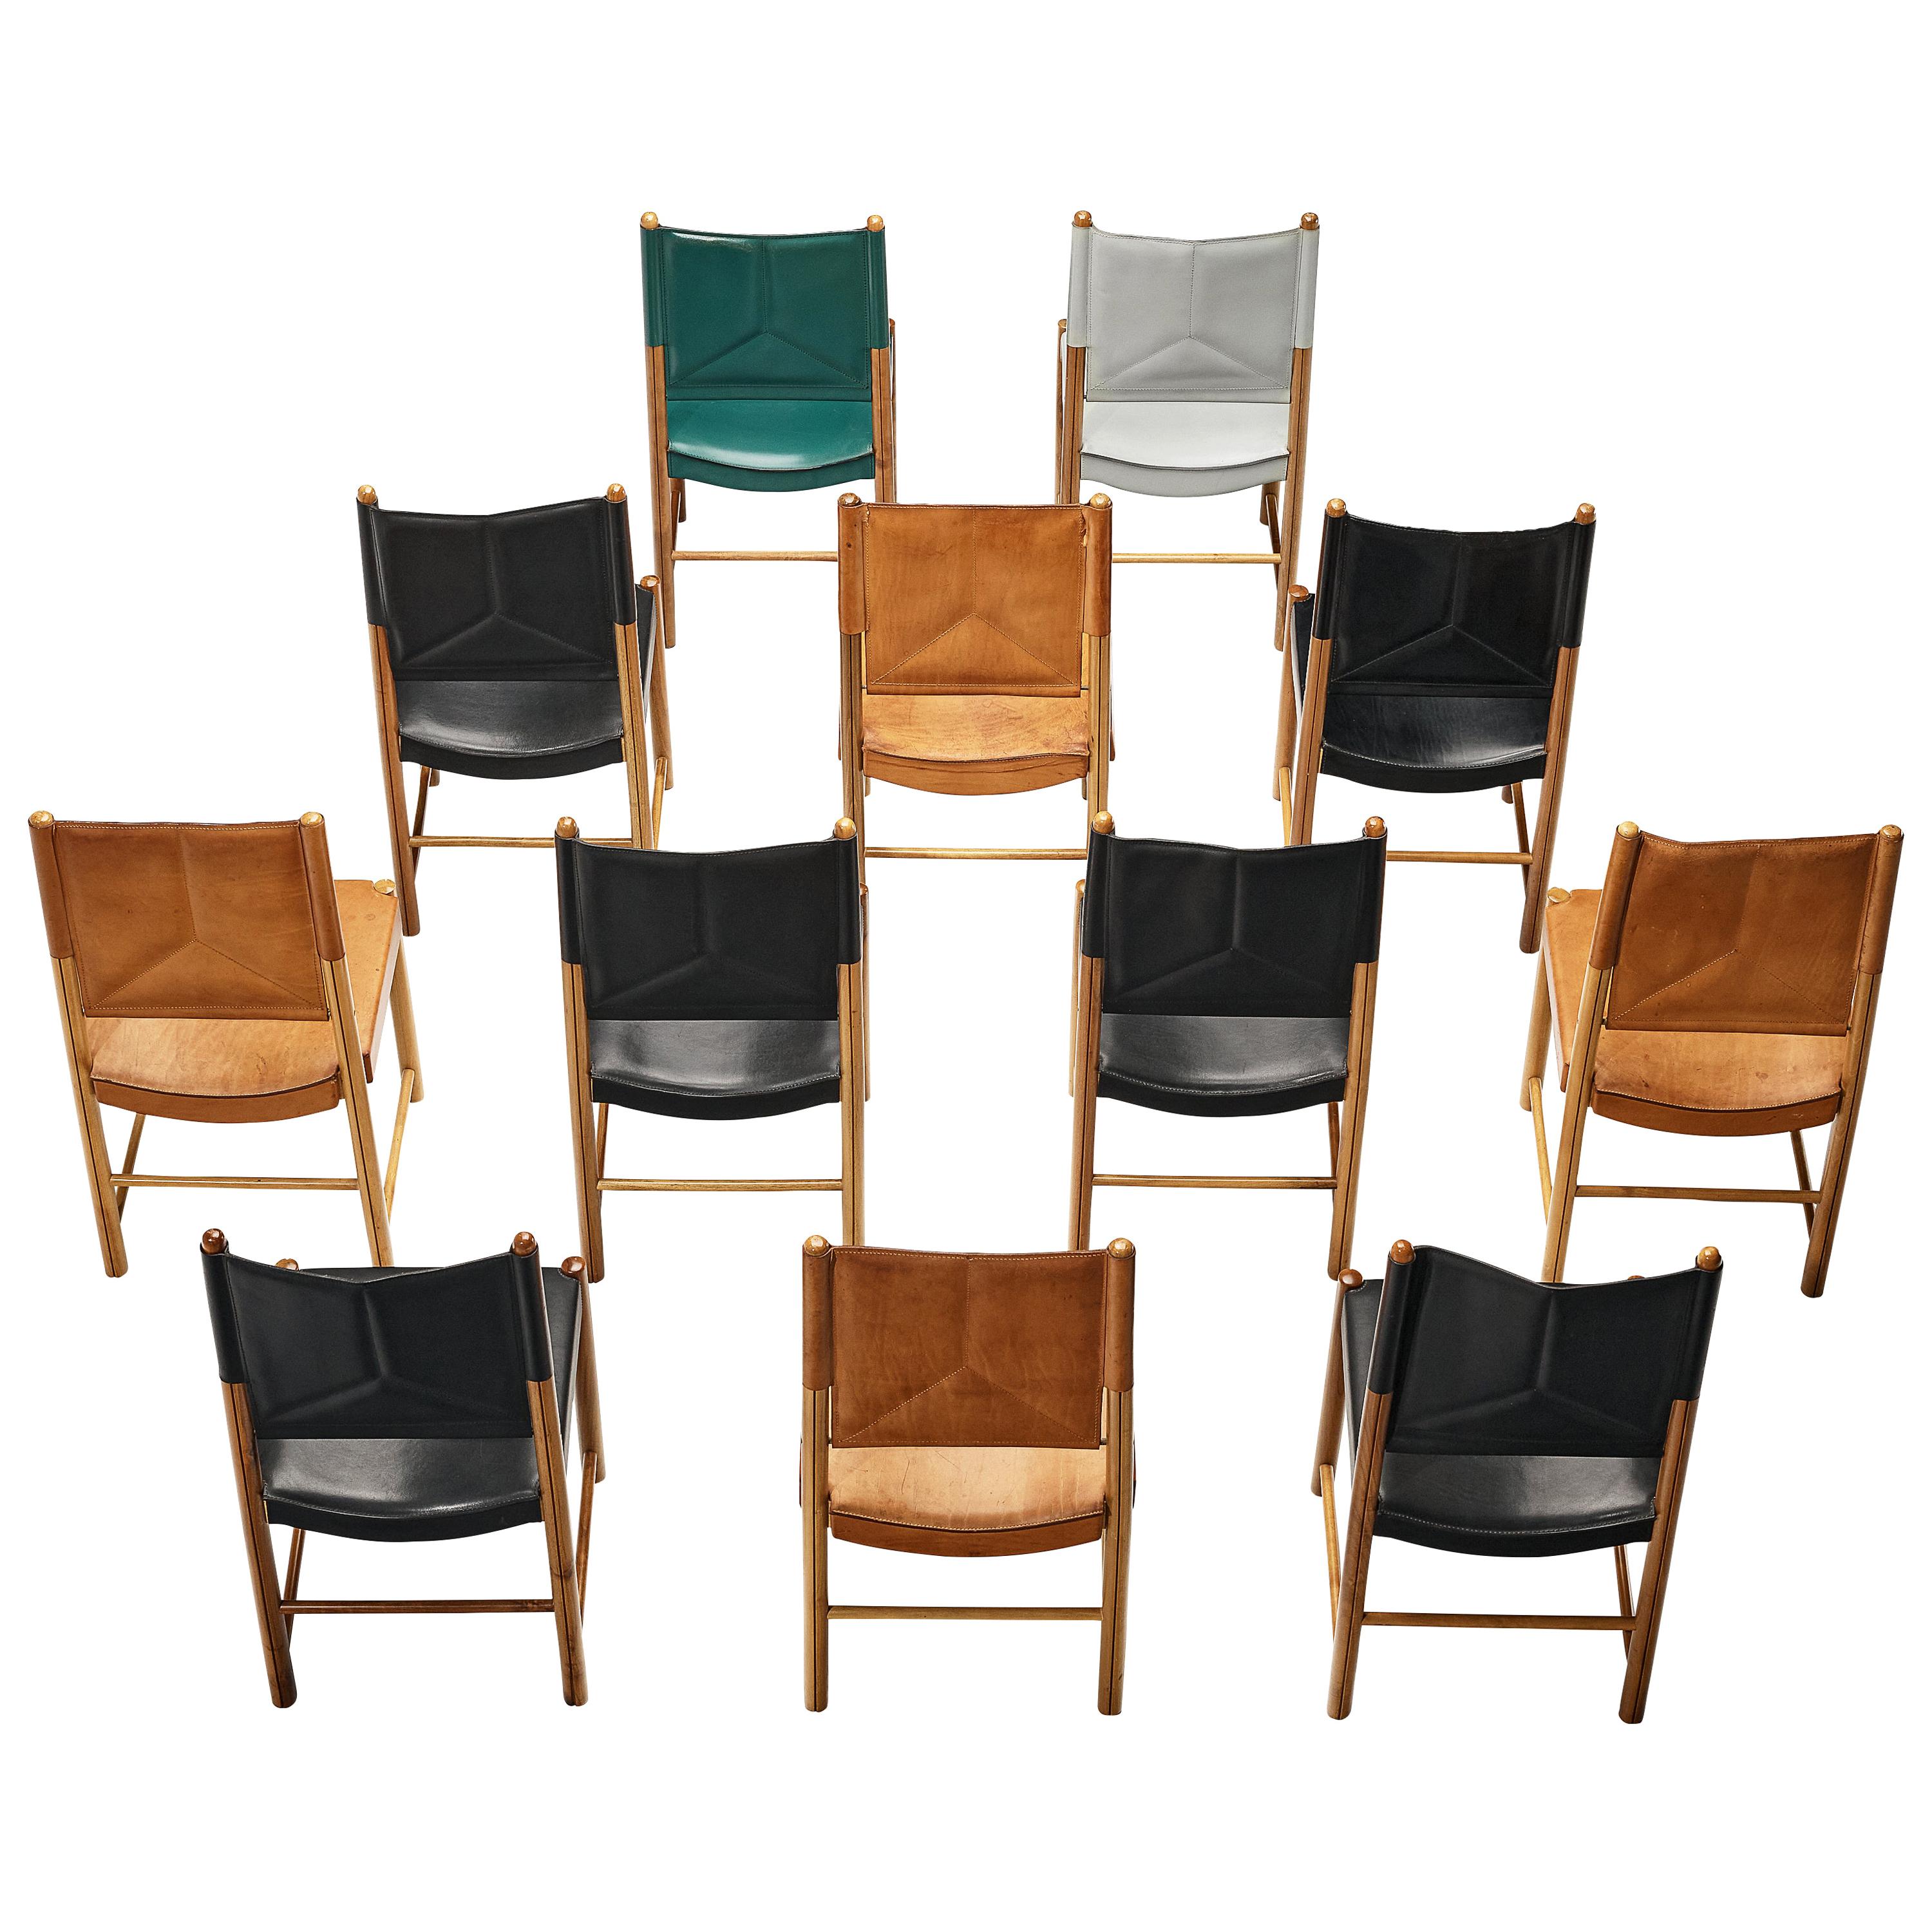 Multicolored Set of 12 Italian Dining Chairs in Leather